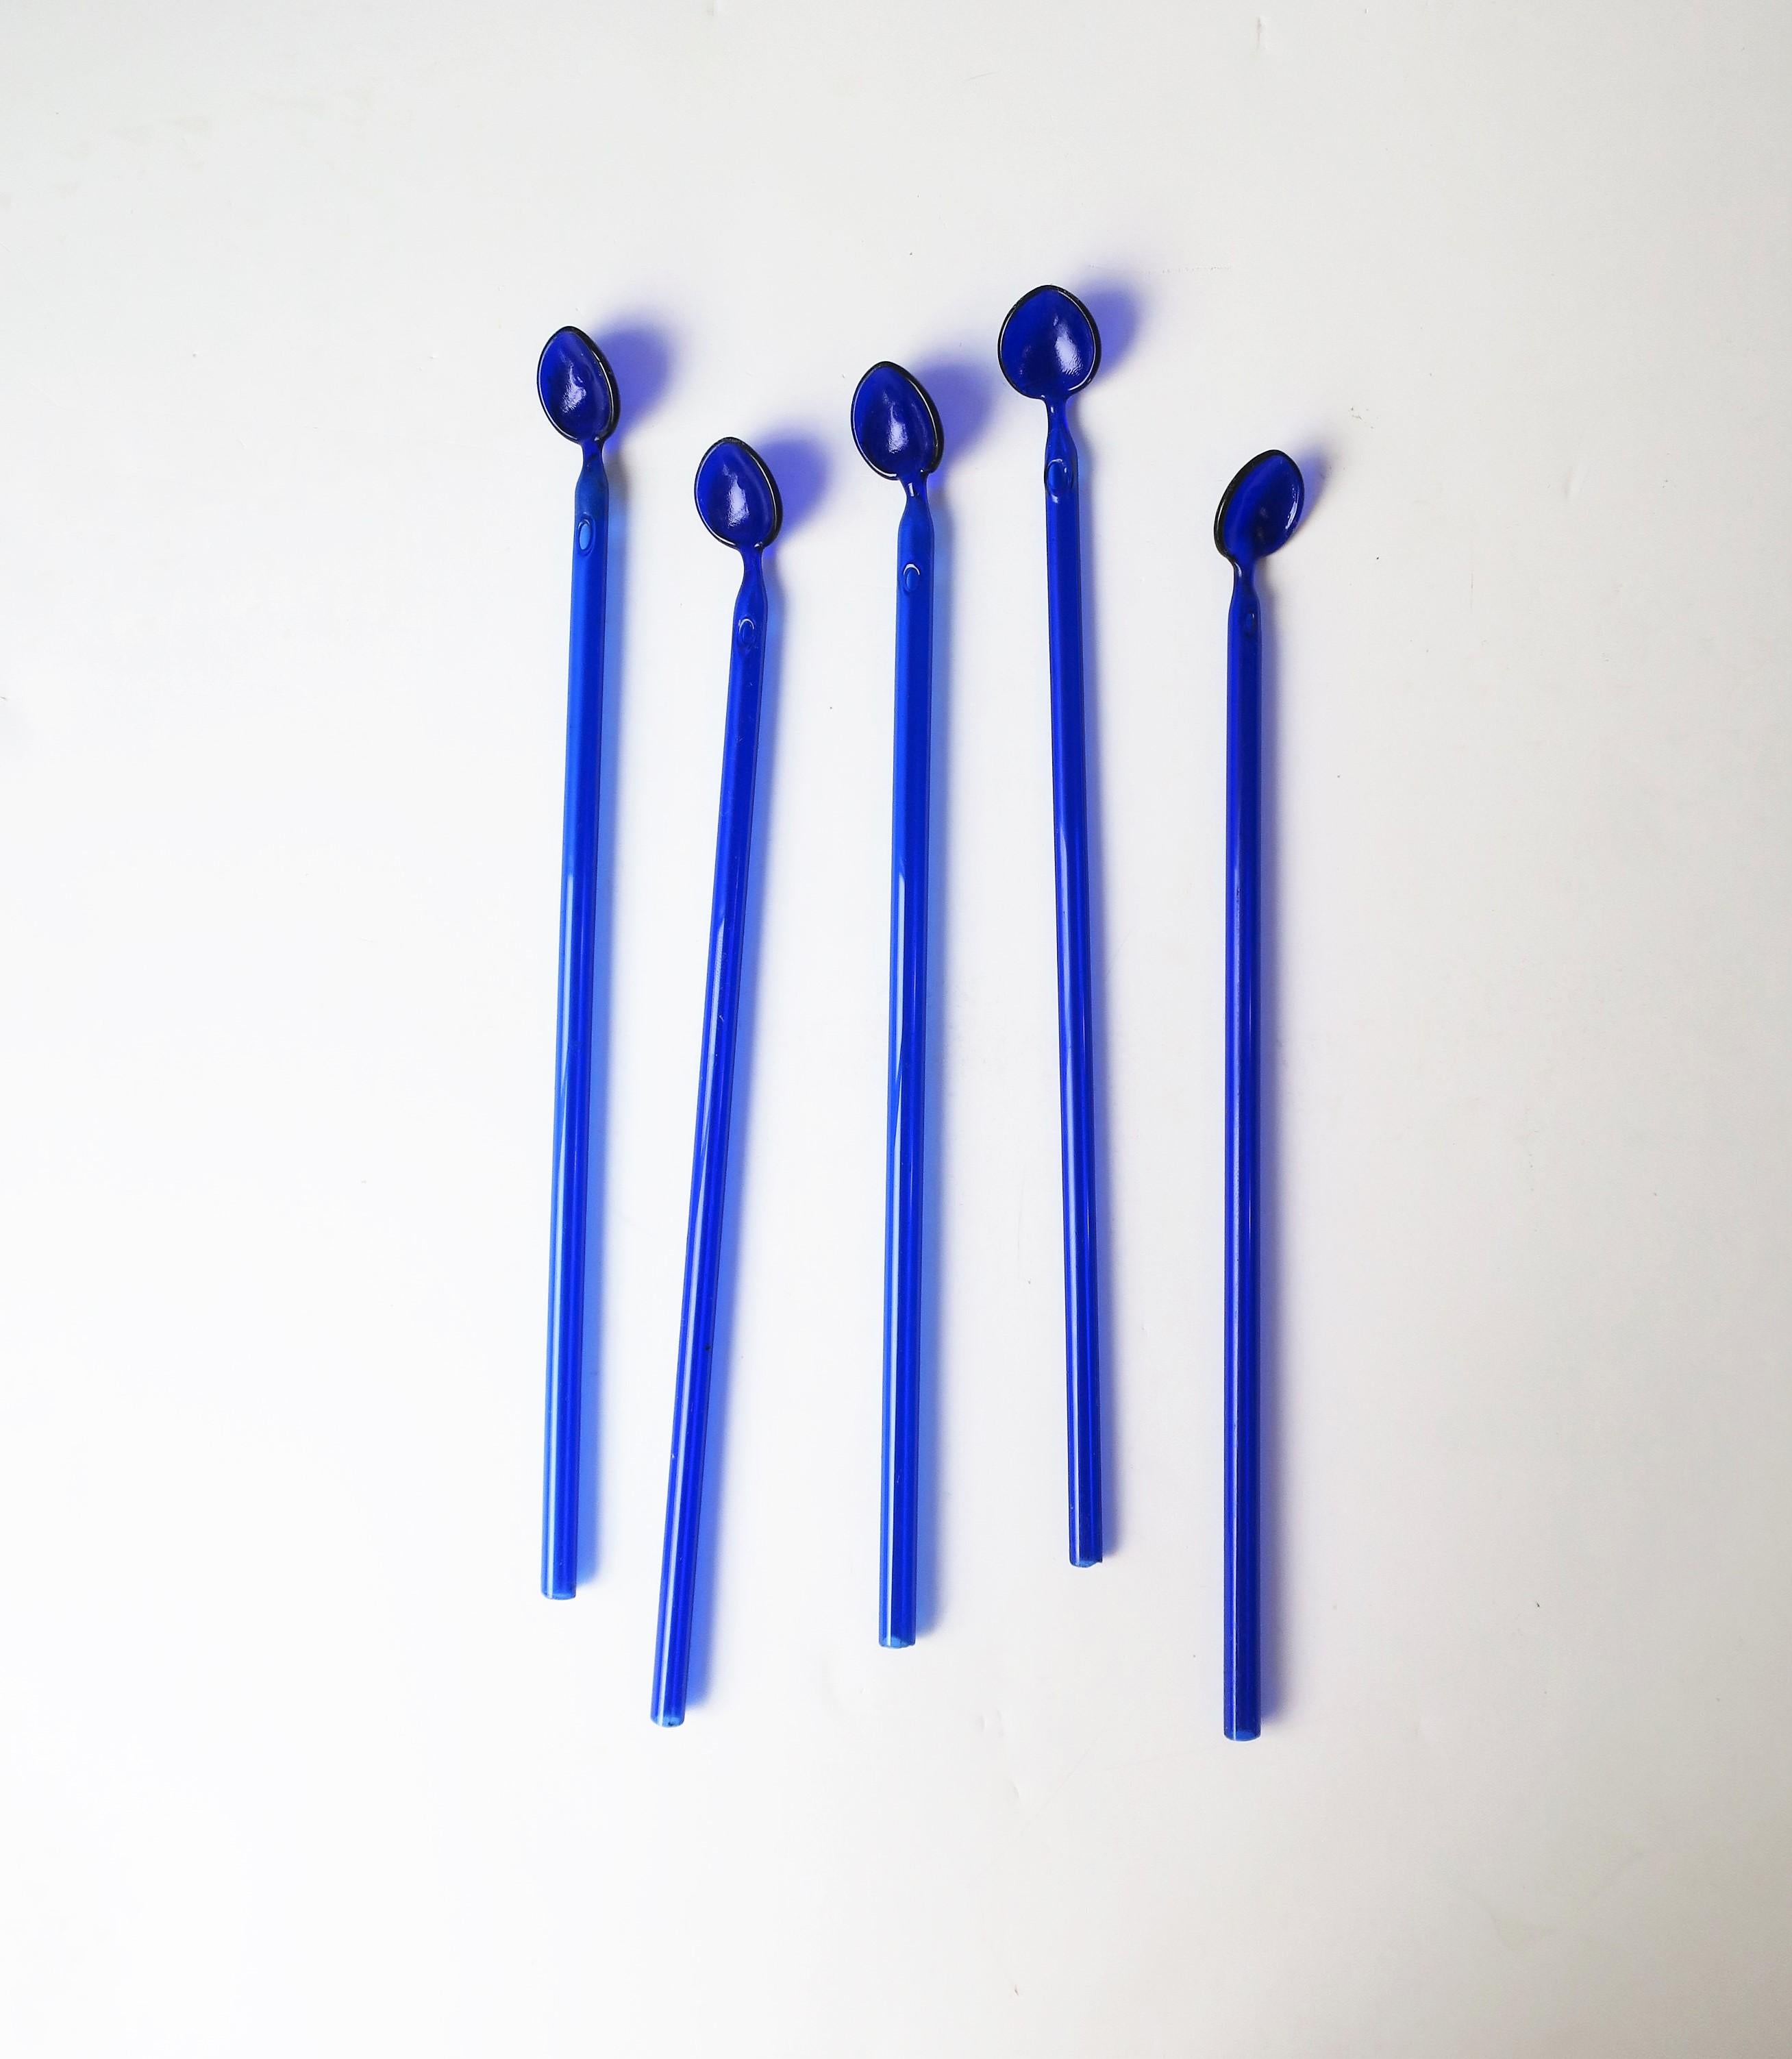 A beautiful set of five (5) vintage Italian barware sapphire blue art glass cocktail stirrers straw and spoon, circa mid-20th century, 1960s, Italy. Beautiful for entertaining; bar, bar cart, yacht, etc. Each measure: 8